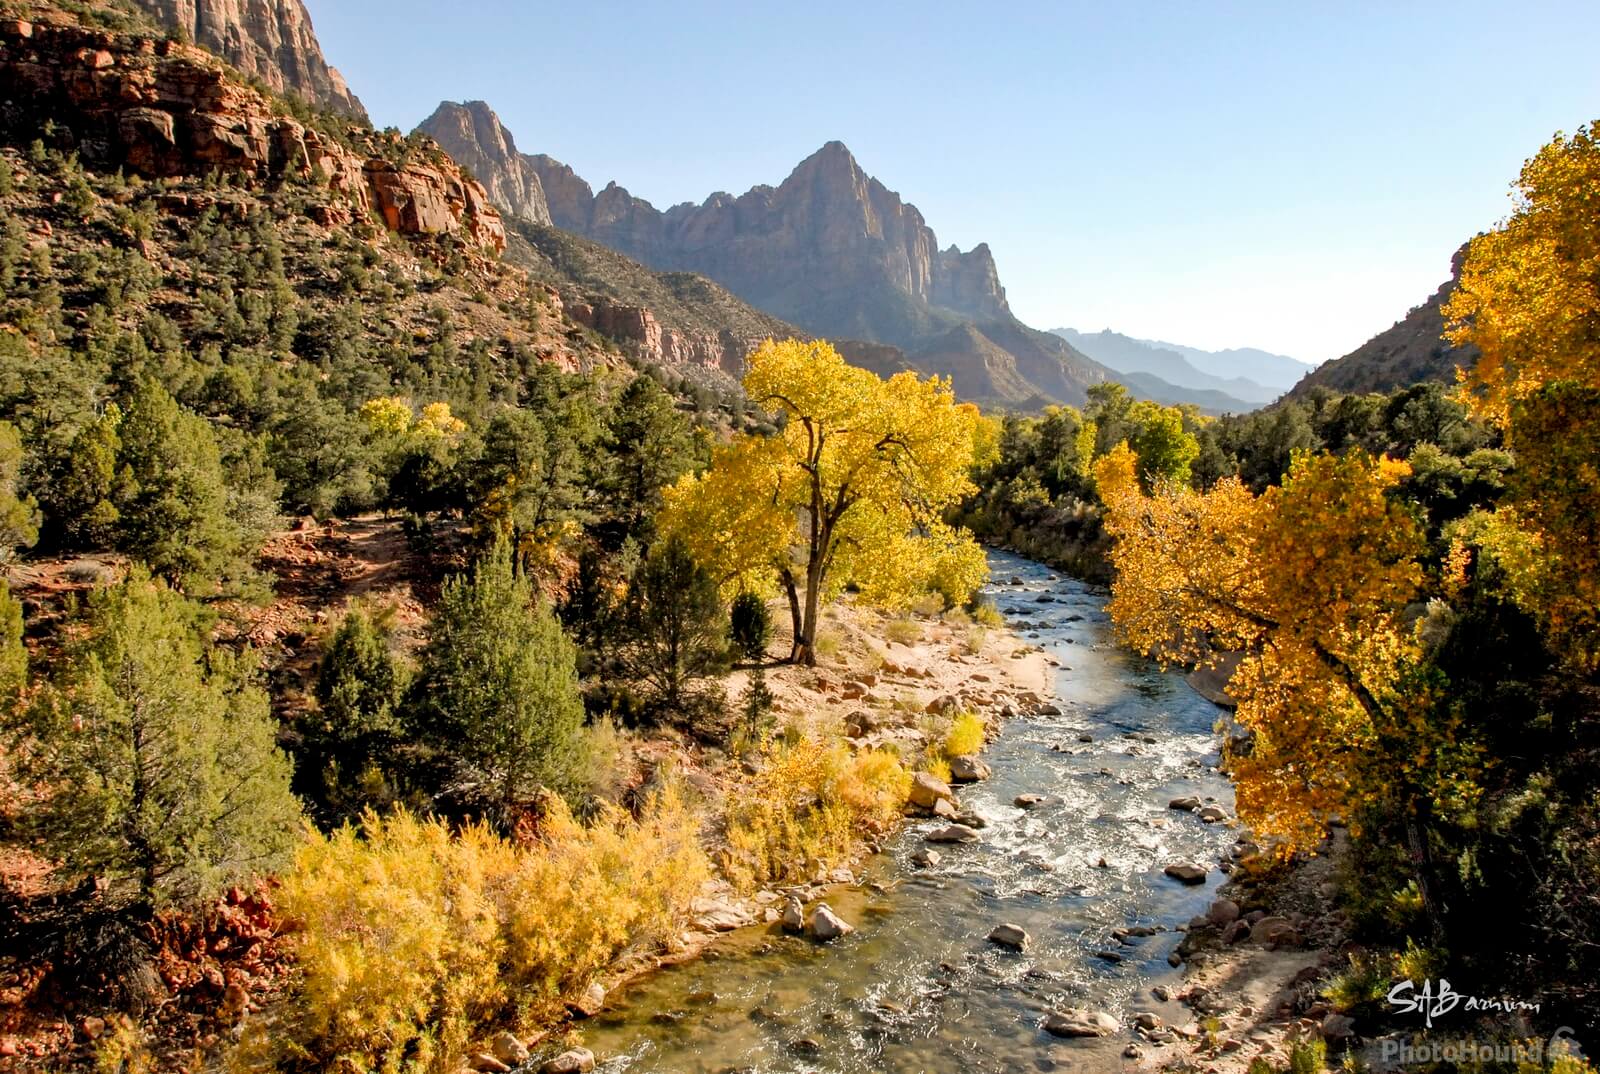 Image of The Watchman - View from the Bridge by Steve Barnum